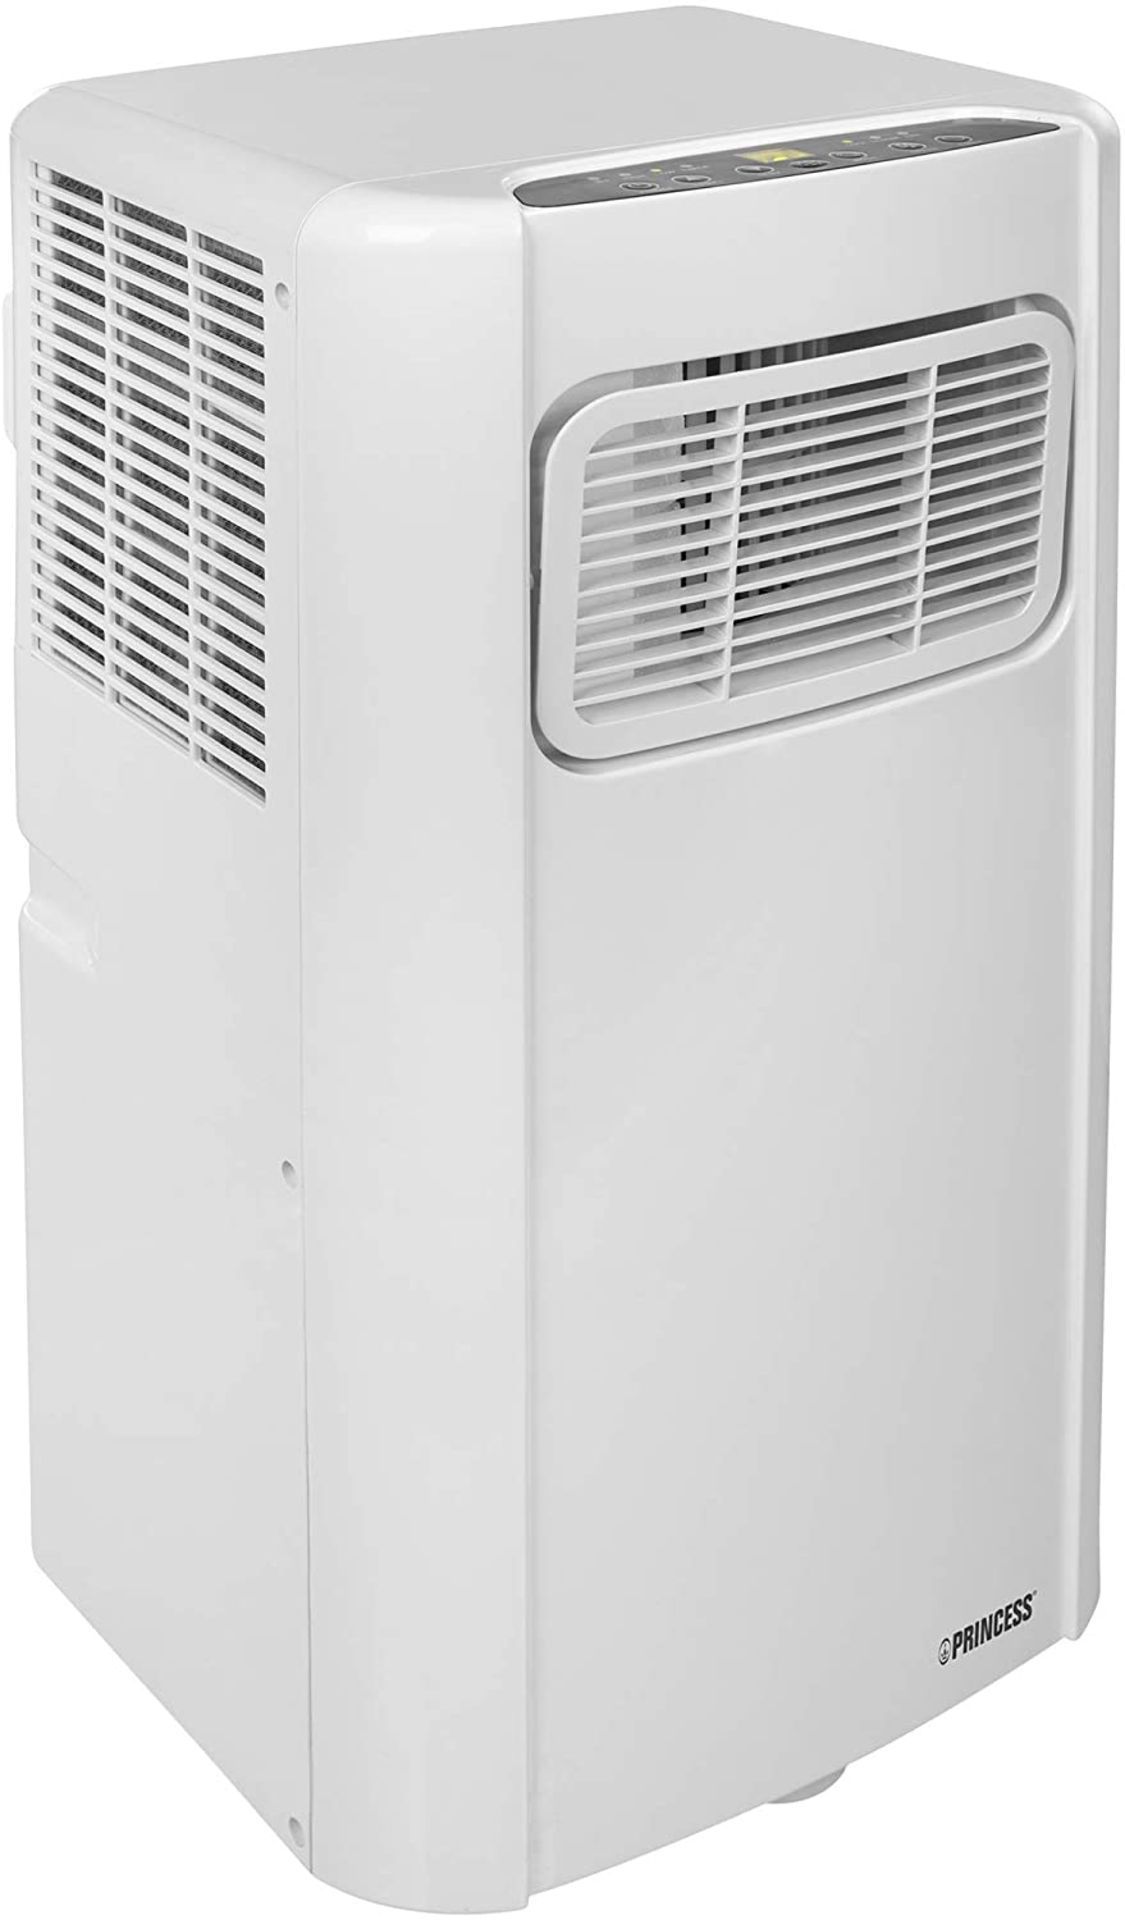 PRINCESS MOBILE AIR CONDITIONER 9000BTU, 785W, A ENERGY RATED RRP £299.99